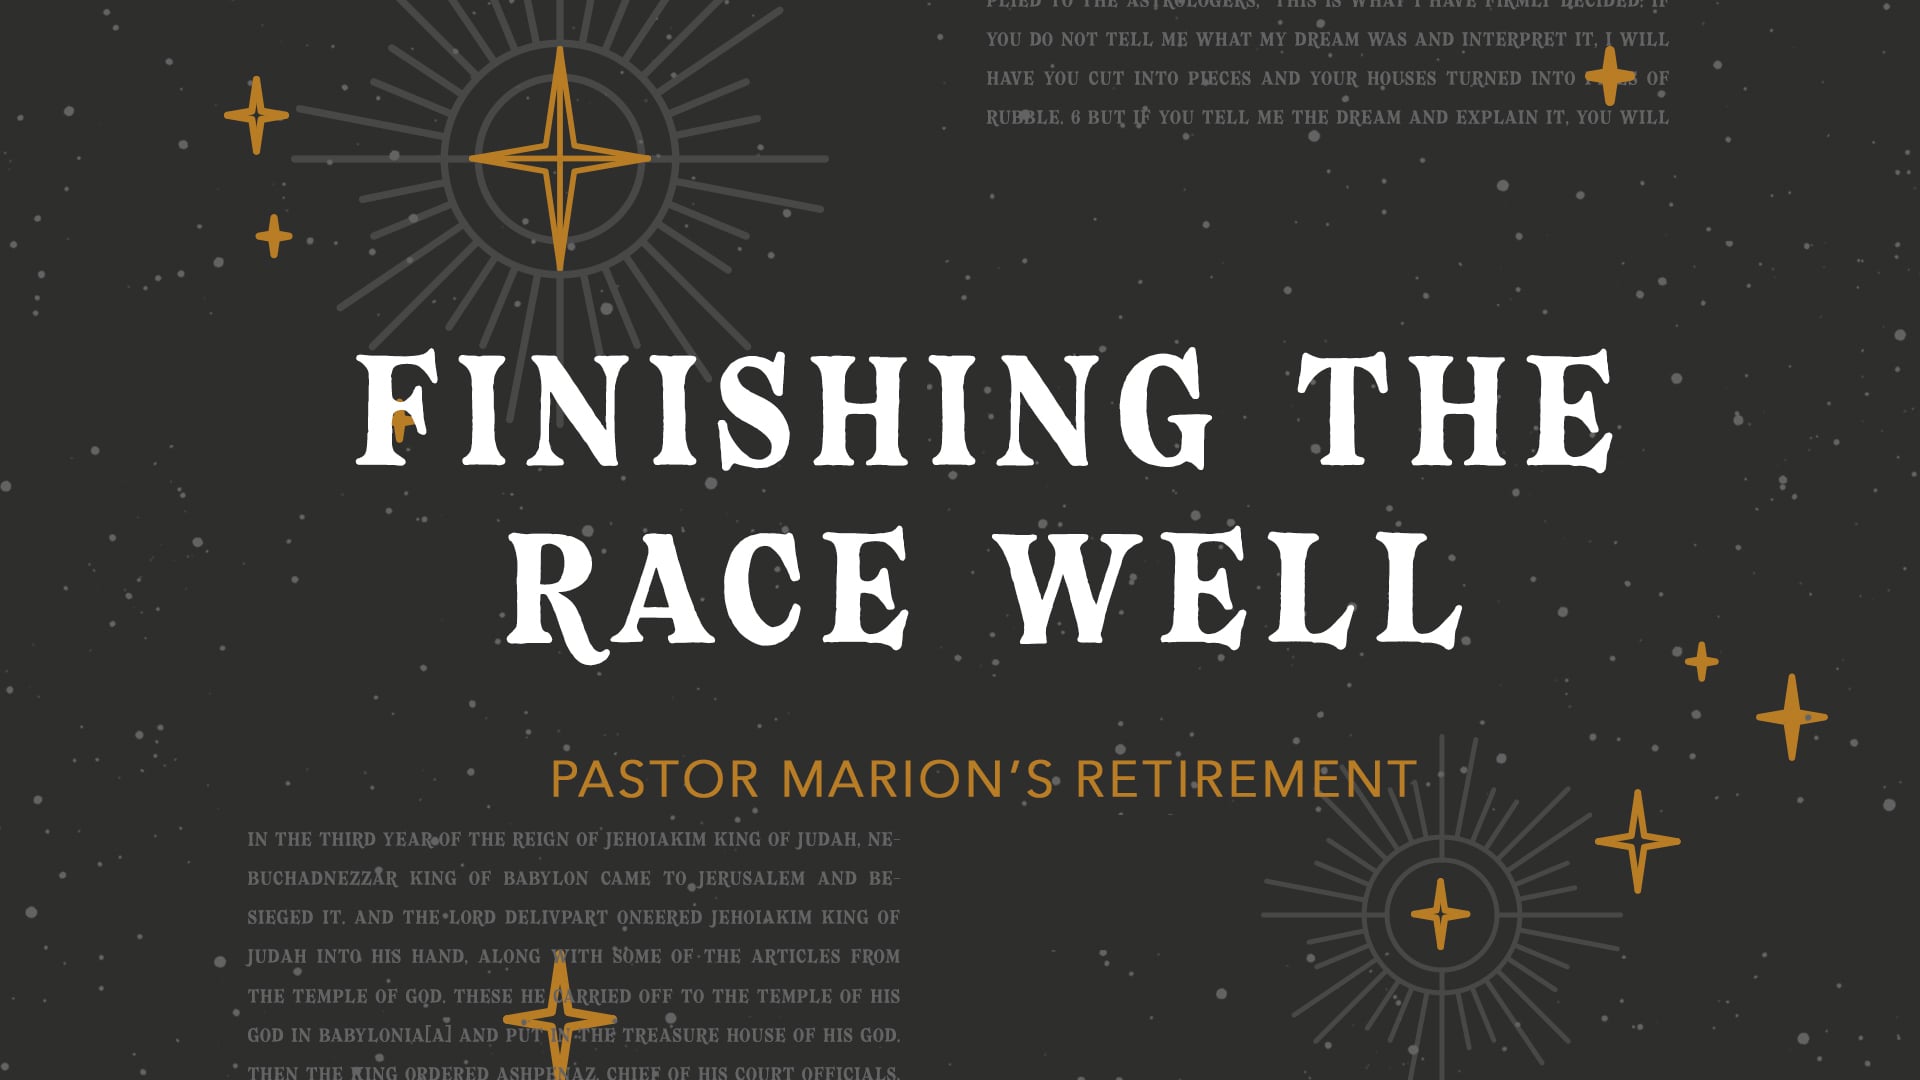 The Book of Daniel - Finishing the Race Well